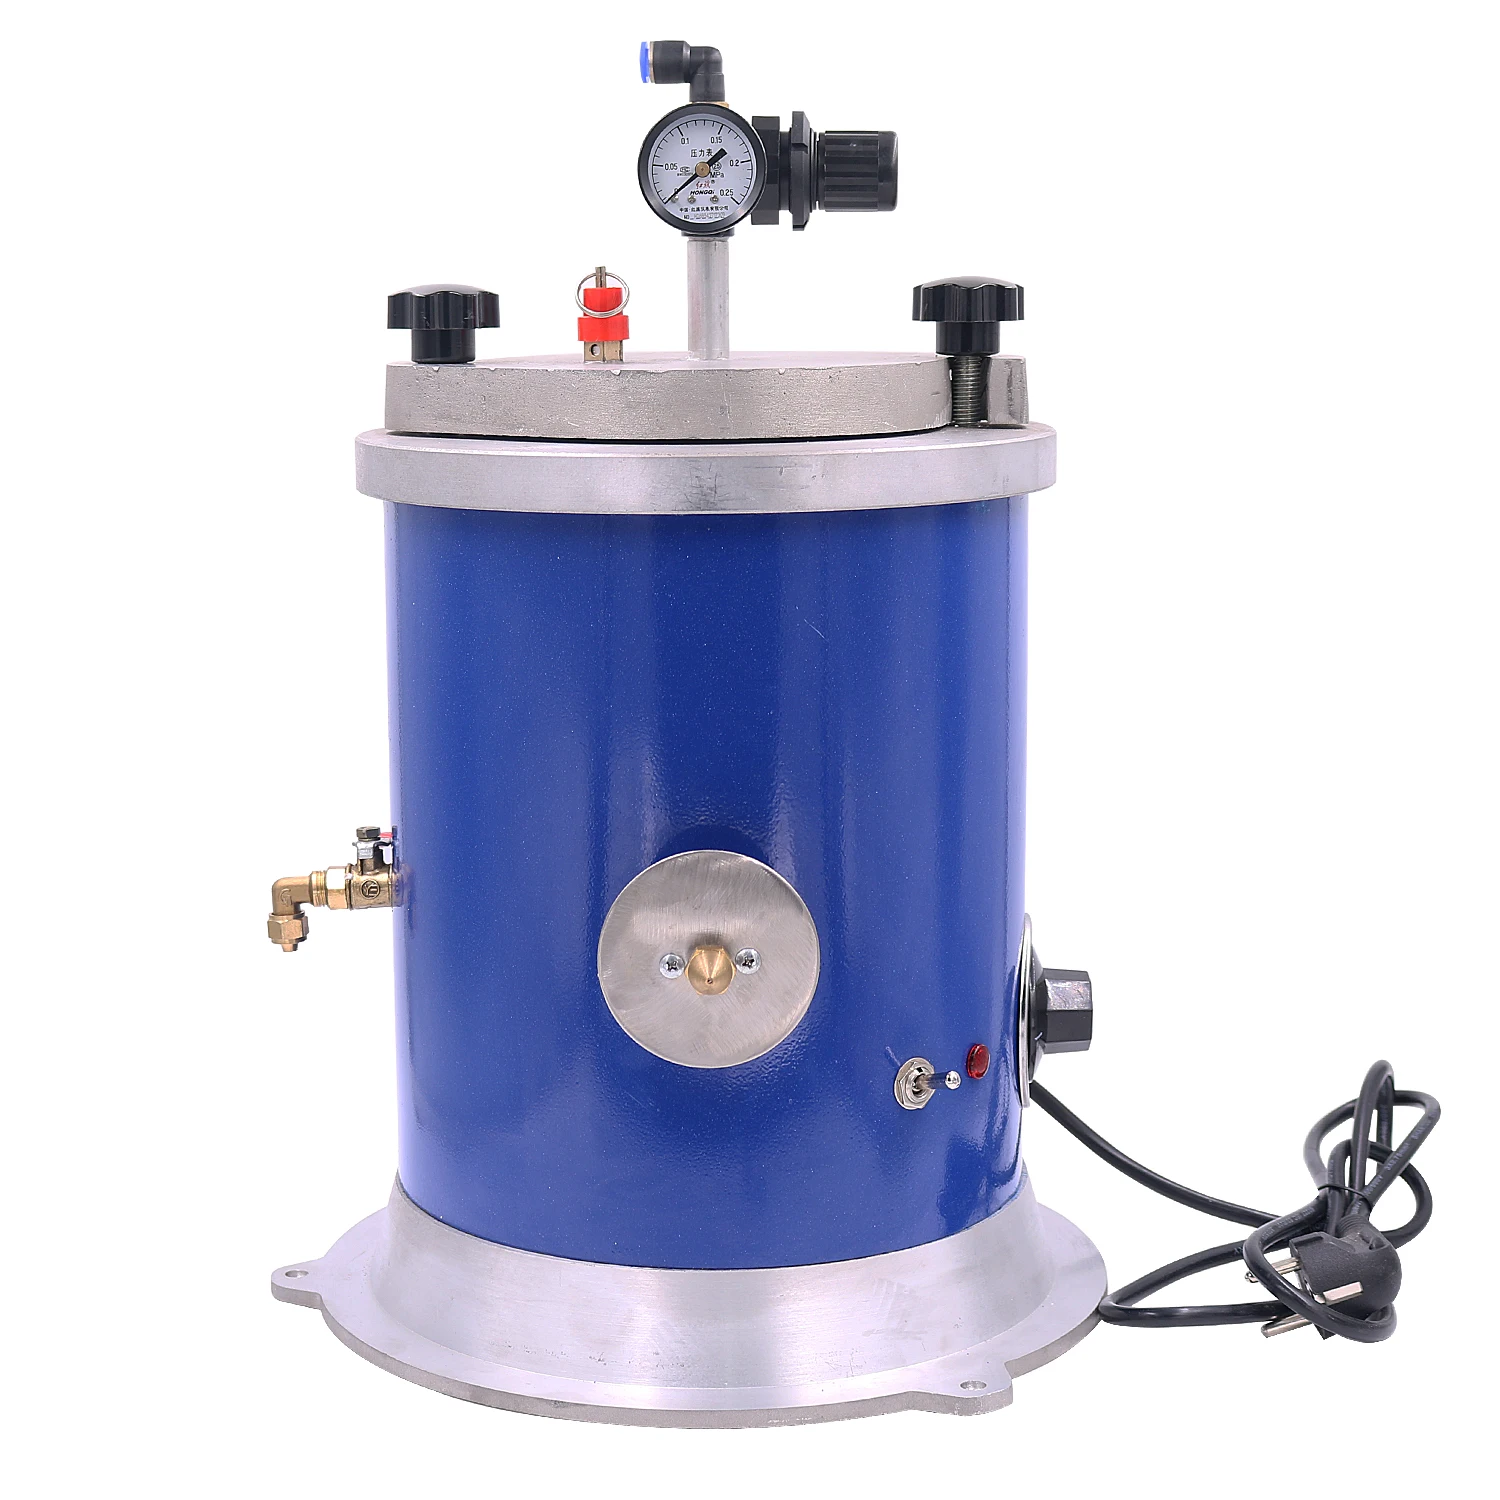 PHYHOO Double Nozzle Wax Casting Machine 5.5LB Tank Wax Injection for Jewelry Tools & Equipments